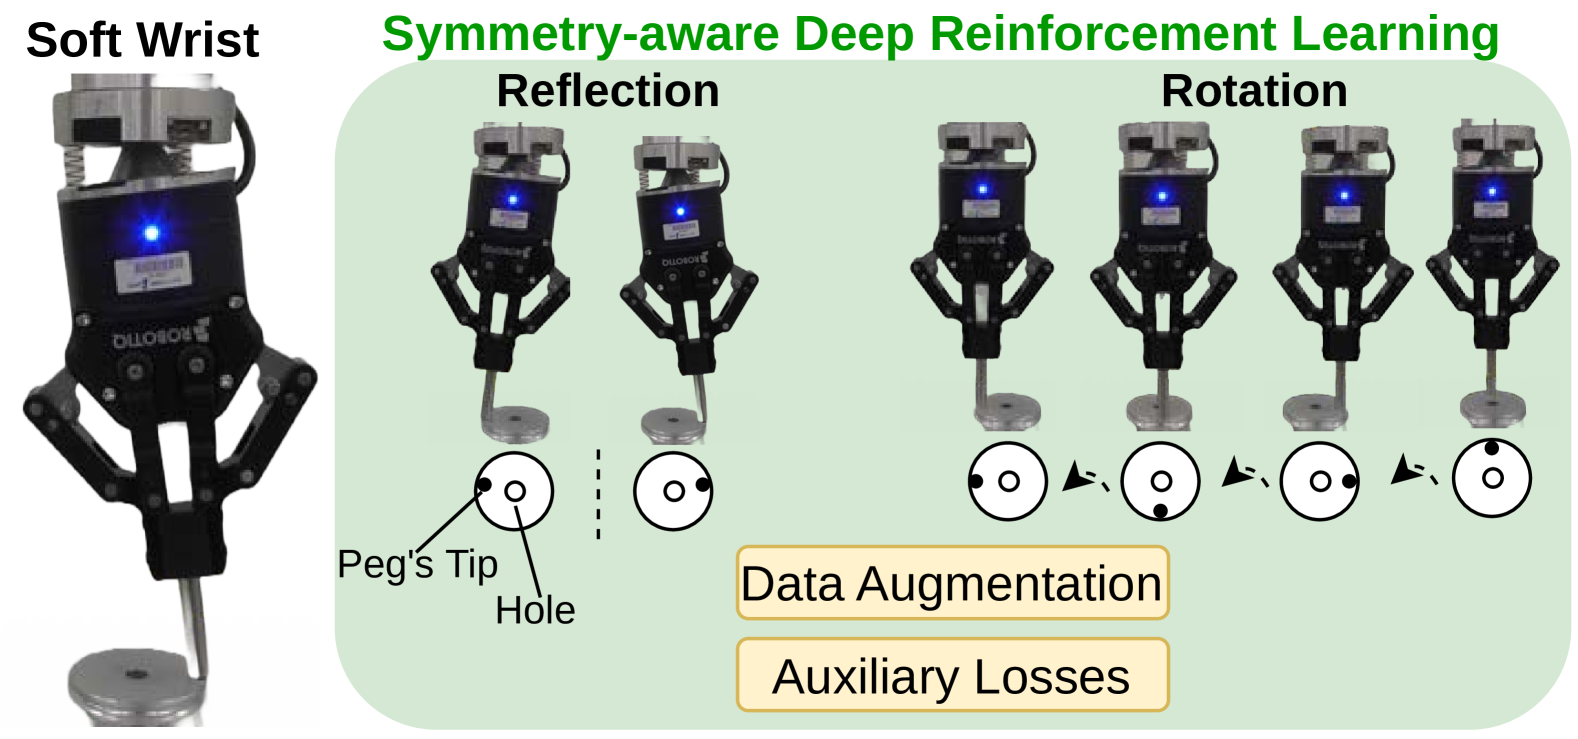 Symmetry-aware Reinforcement Learning for Robotic Assembly under Partial Observability with a Soft Wrist